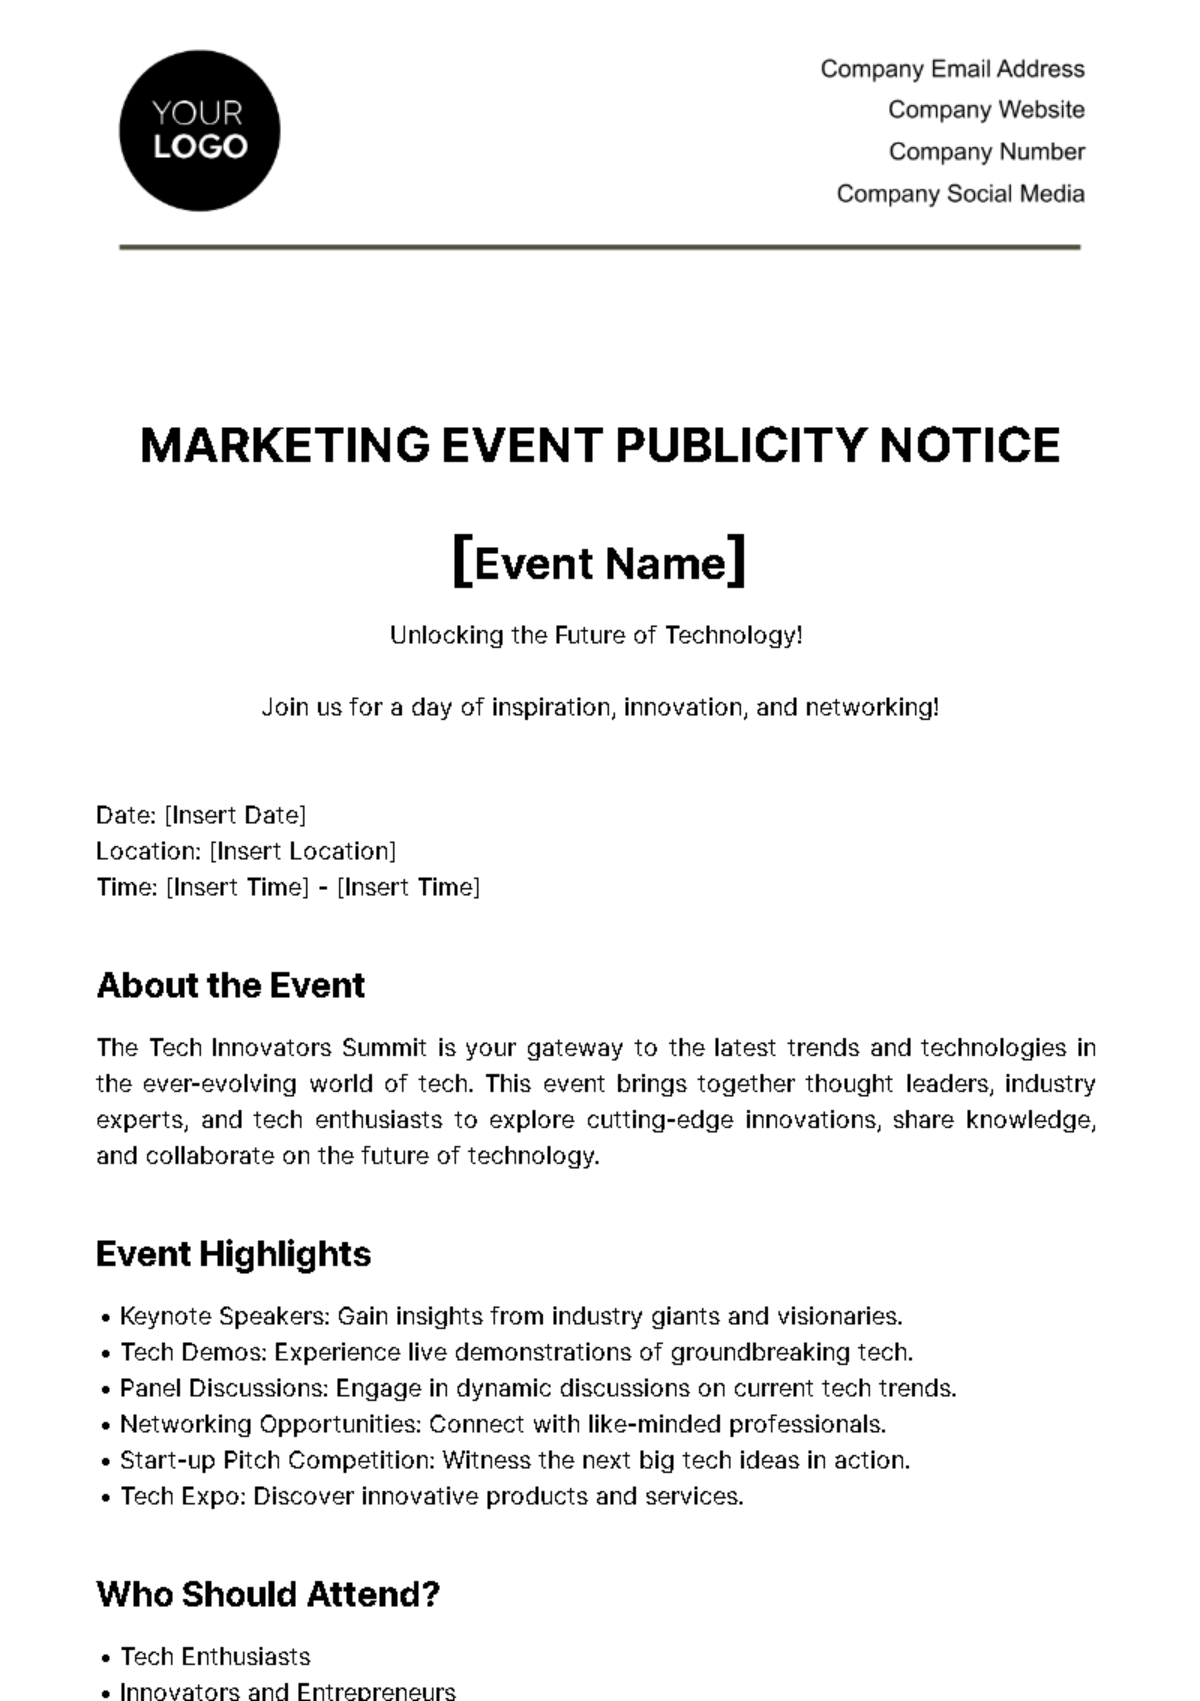 Free Marketing Event Publicity Notice Template